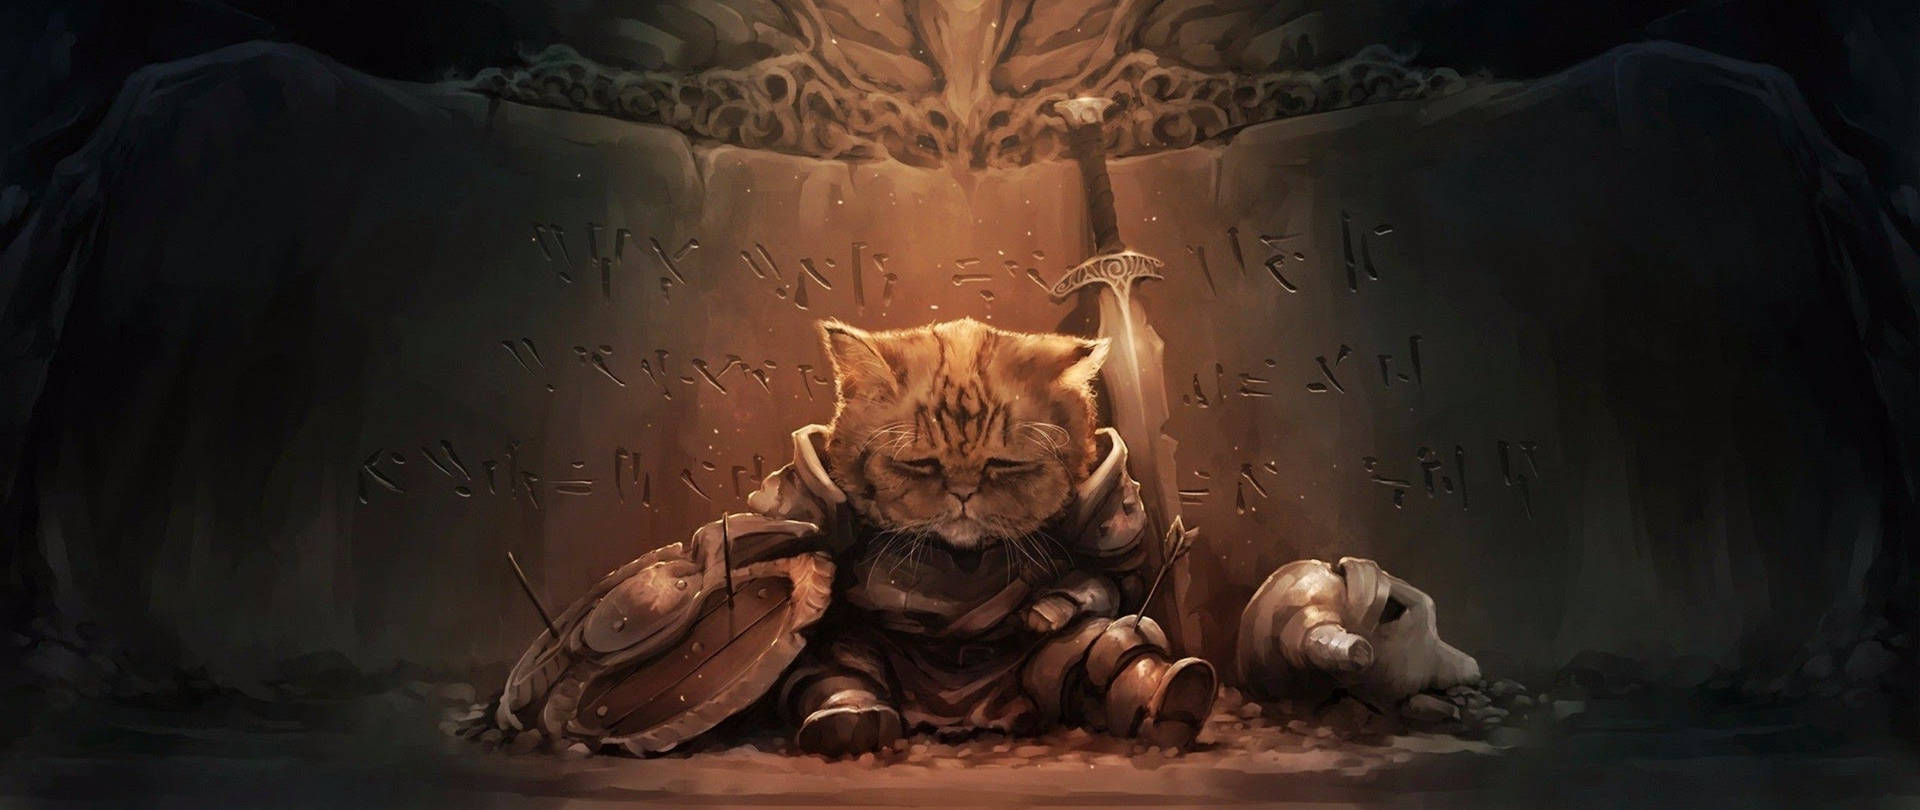 Cat Art Warrior With Shield